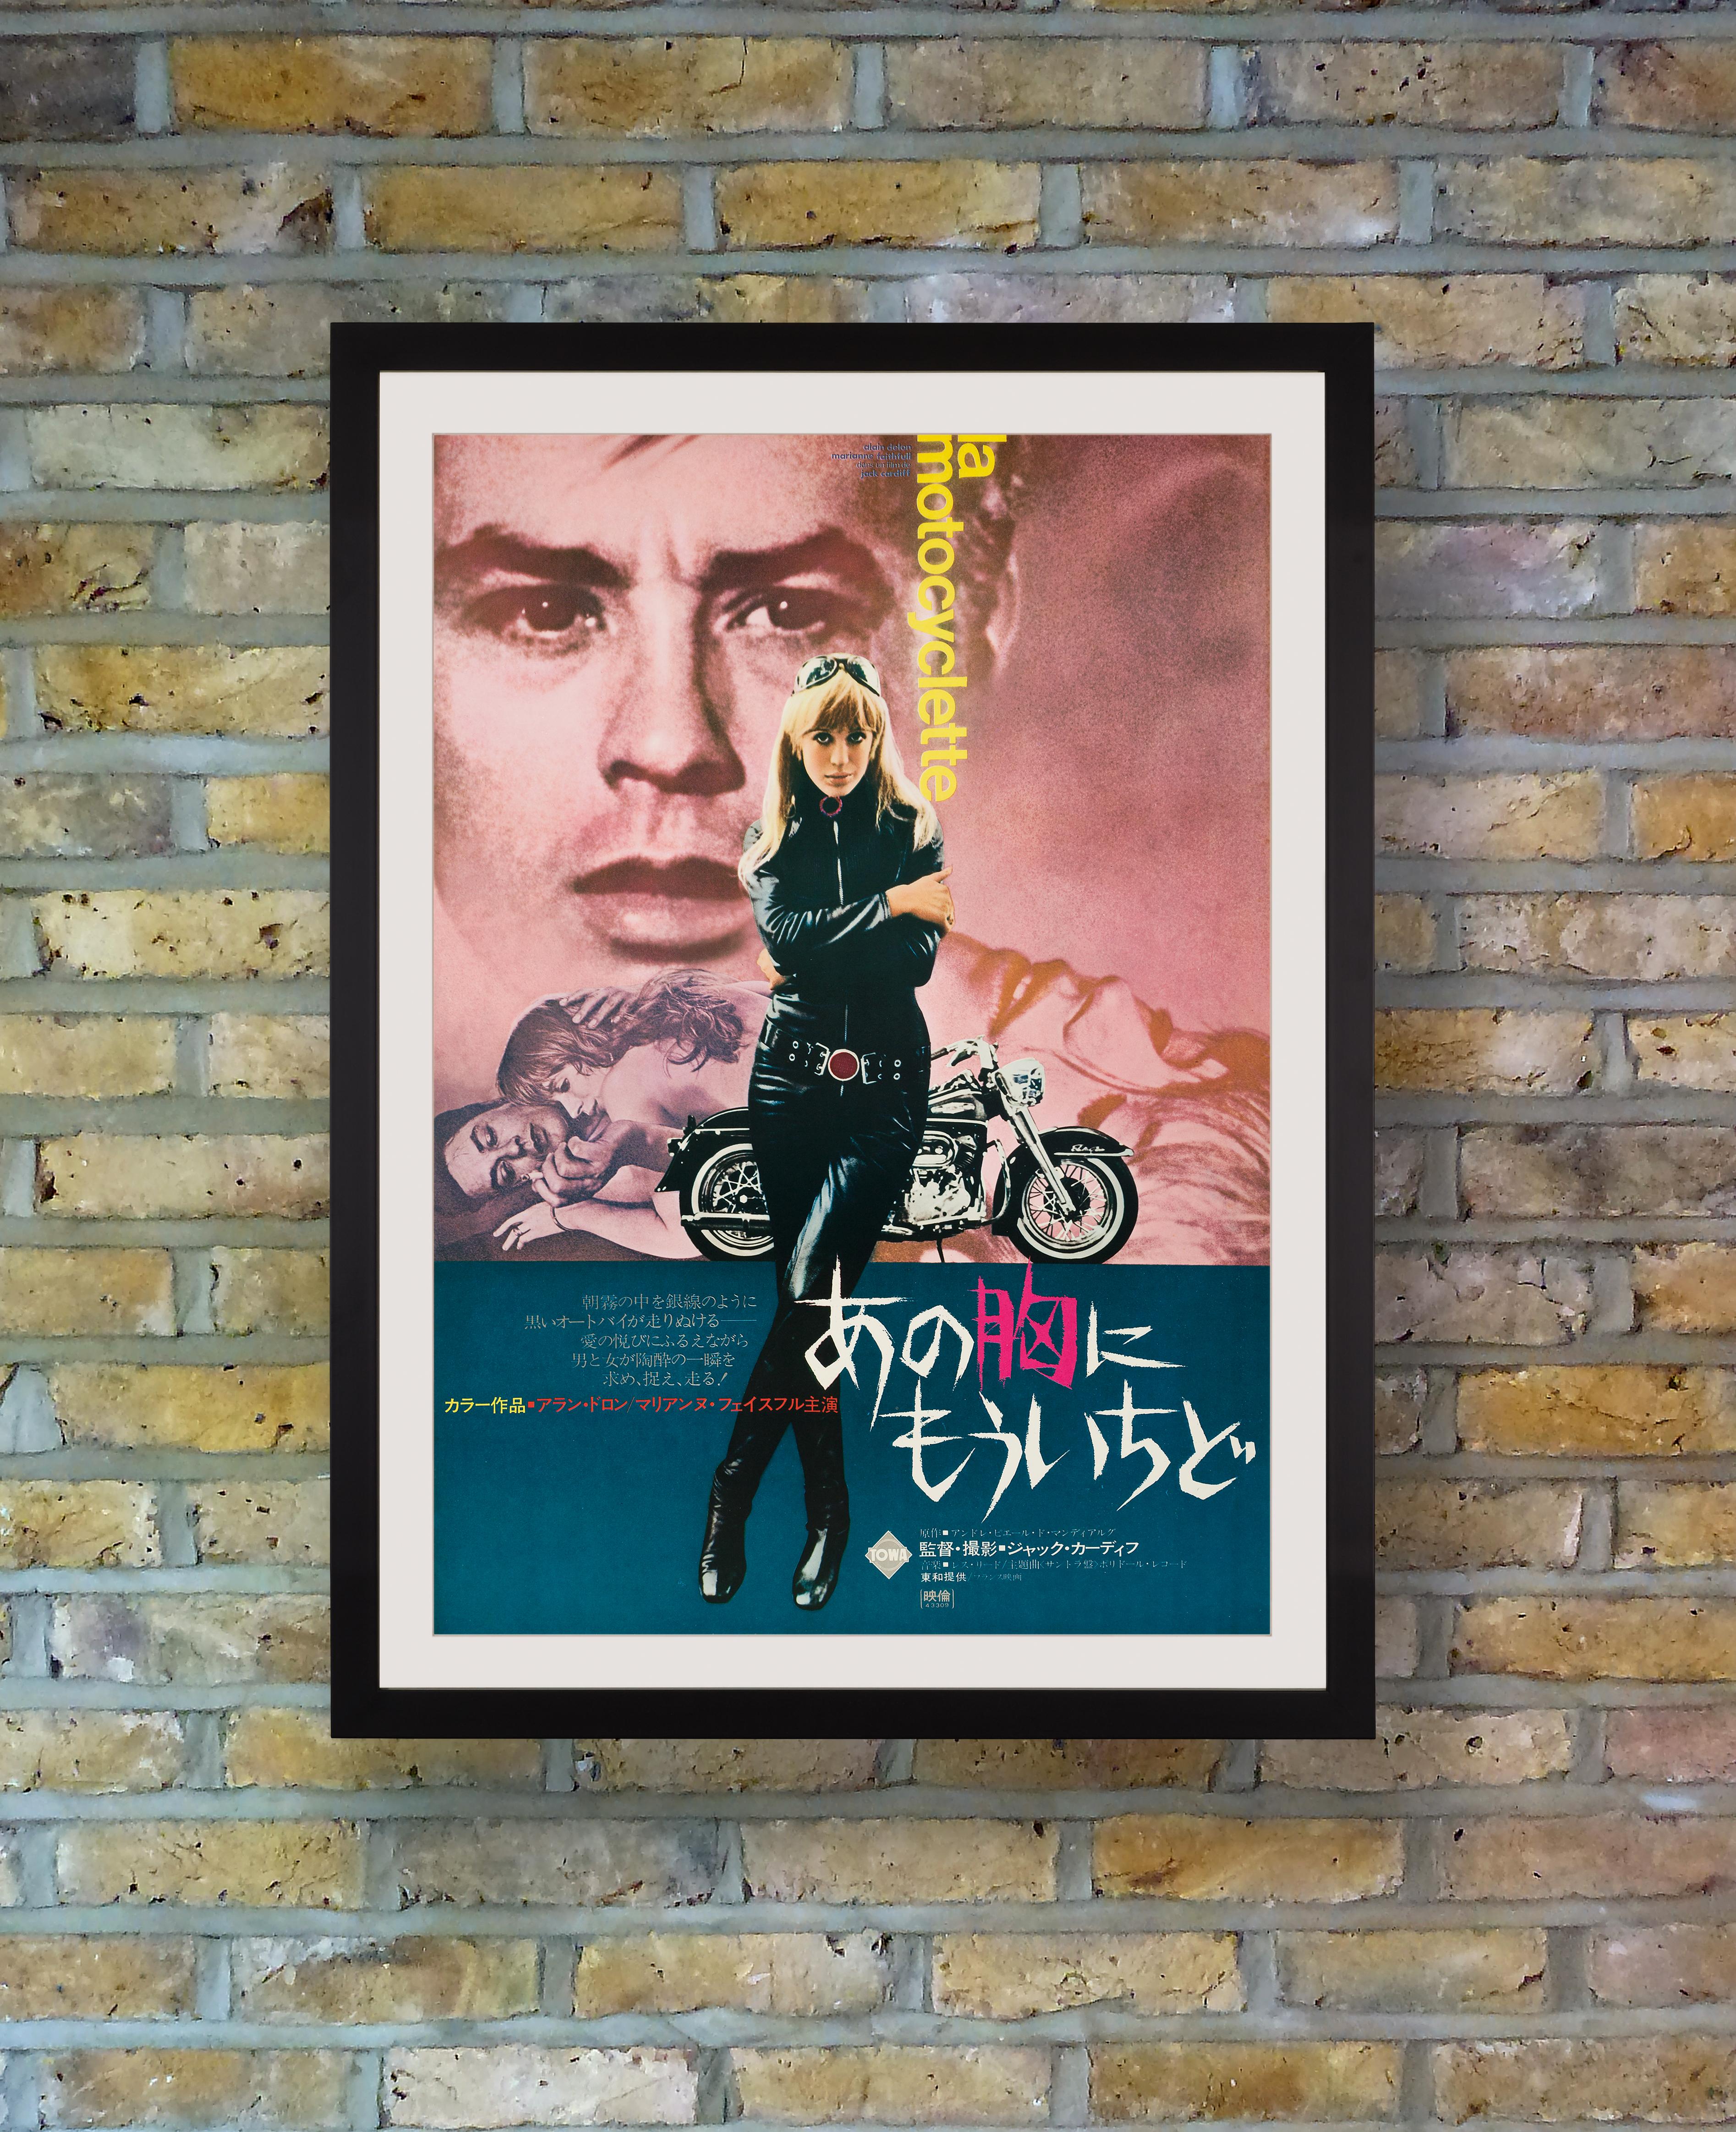 A rare Japanese B2 for the 1960s cult classic 'The Girl on a Motorcycle,' which followed Marianne Faithful on a psychedelic motorcycle ride across Germany to see her lover. The American title of the film 